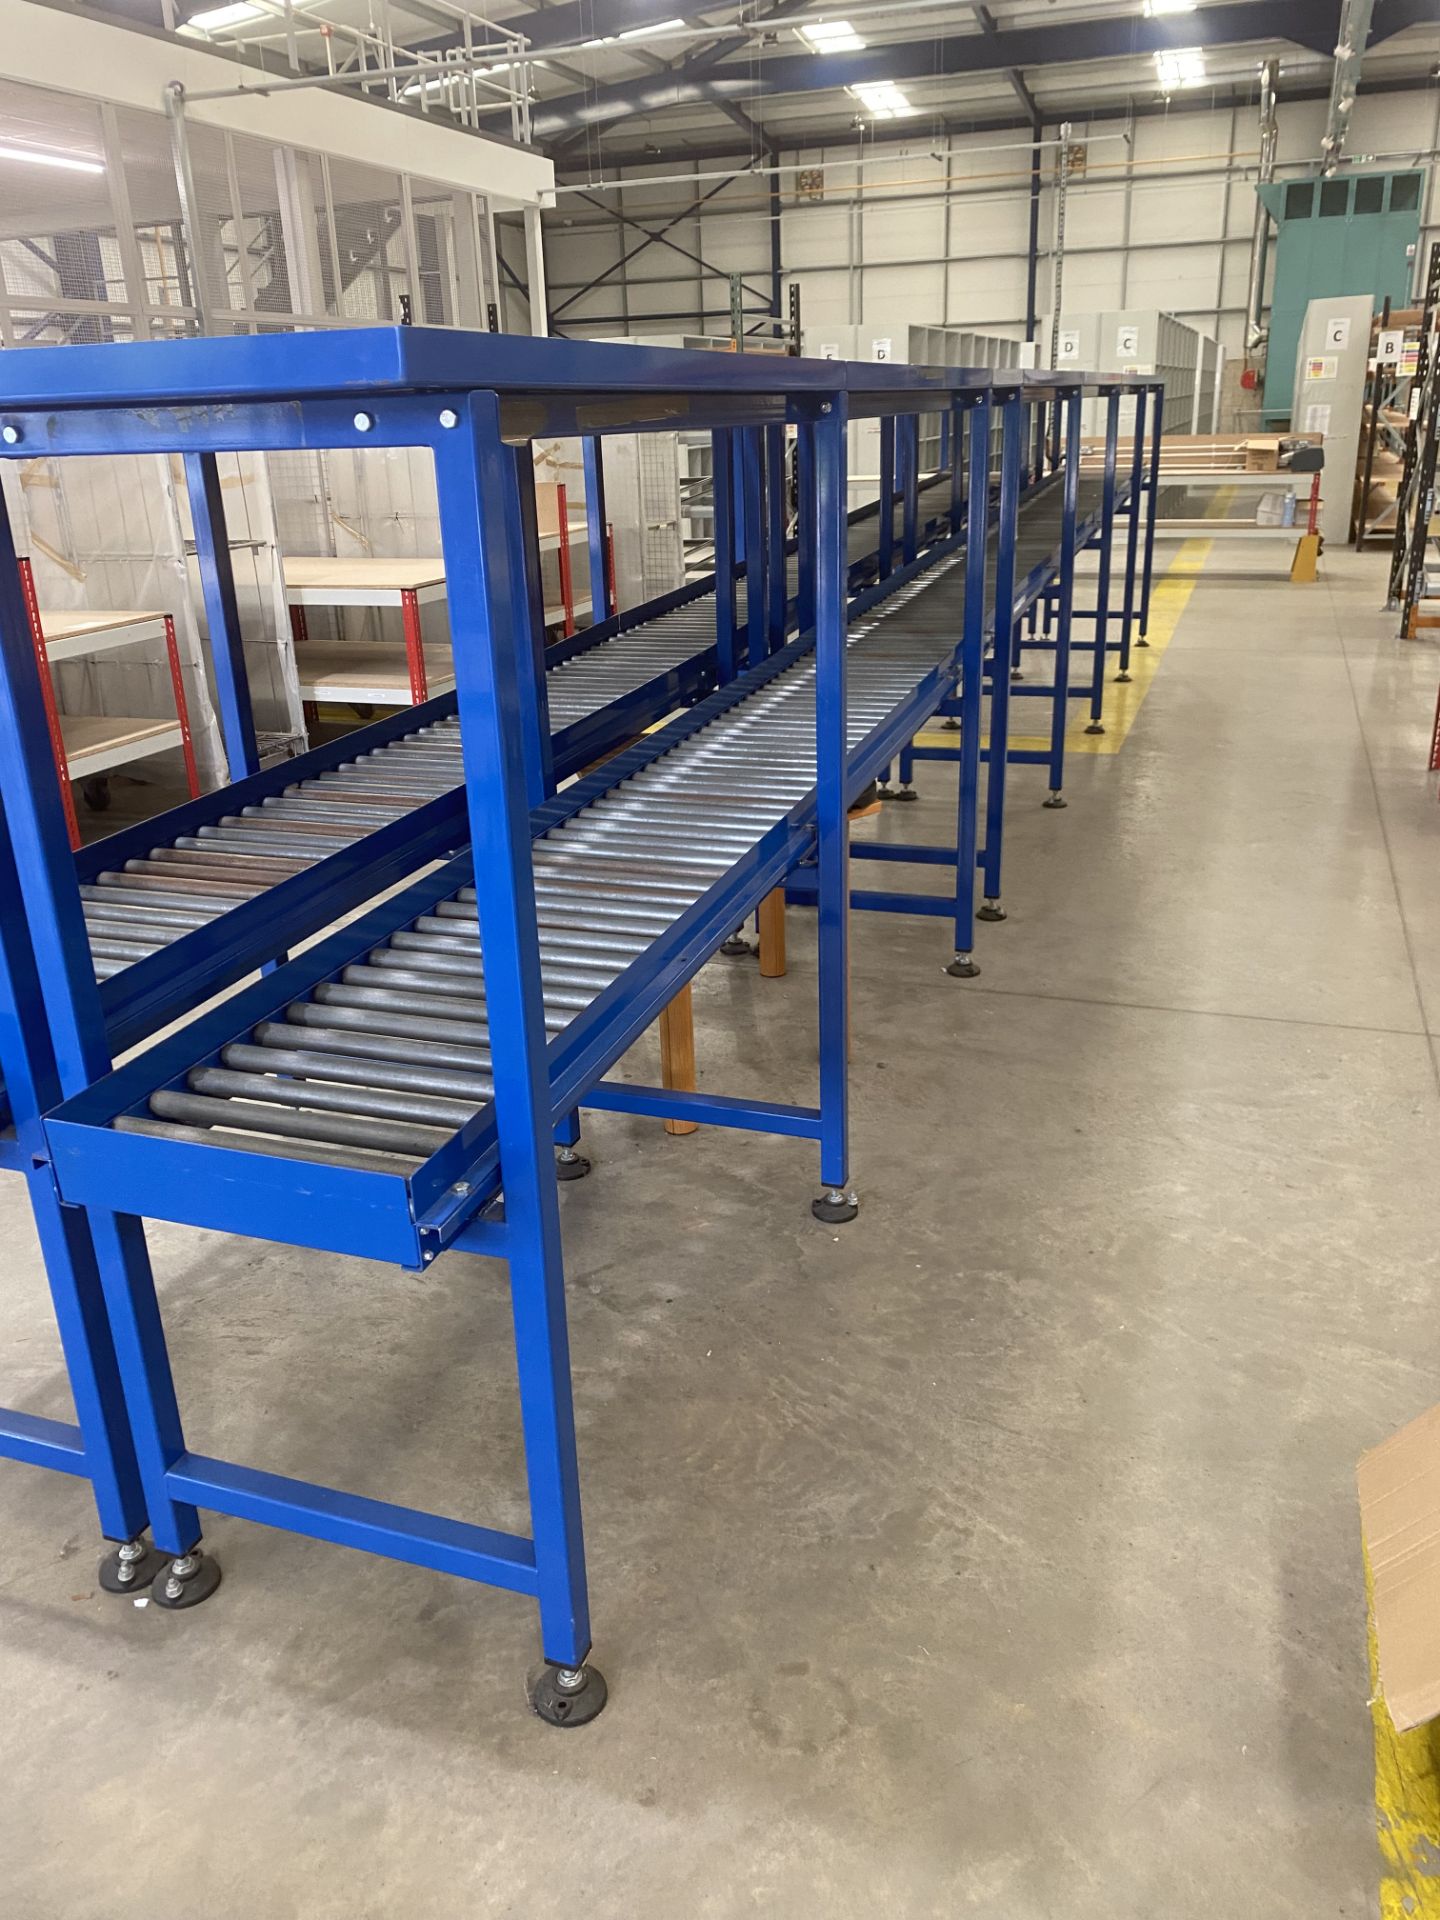 WAREHOUSE ROLLER CONVEYOR SYSTEM WITH TOP SHELF STORAGE 9.5M (3 SECTIONS OF 3M - CAN BE DISMANTLED)